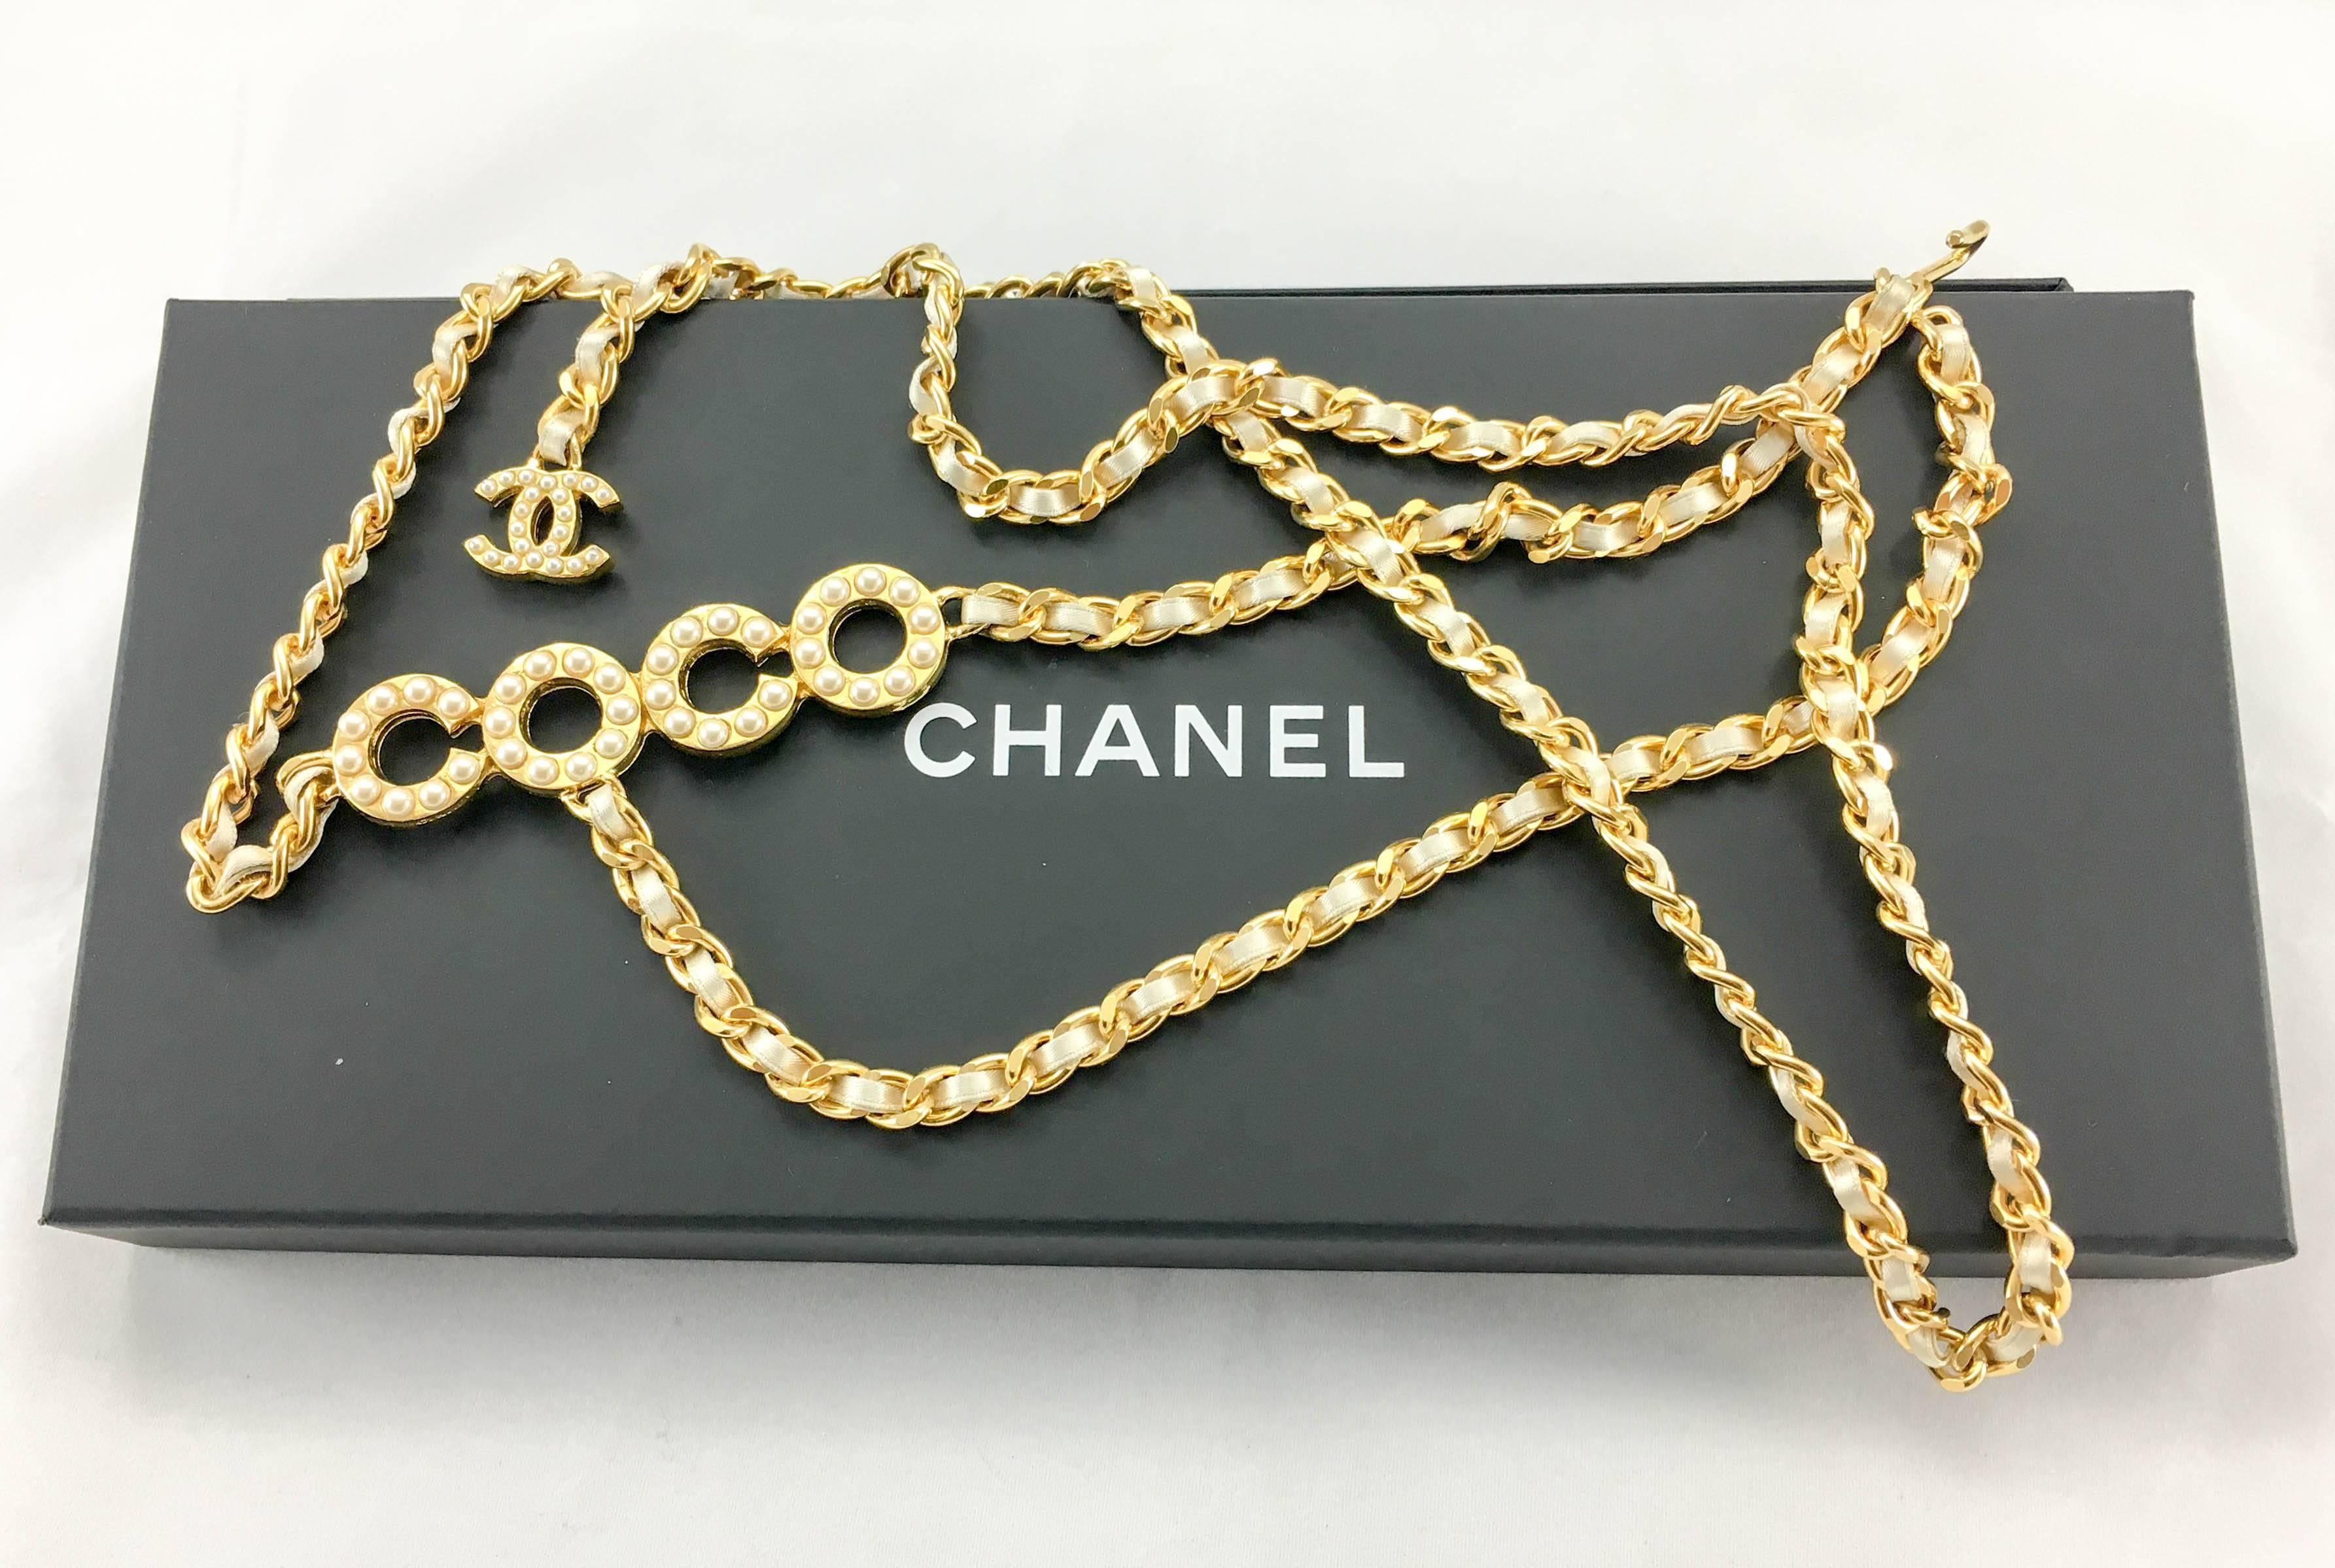 Gorgeous Vintage Chanel ‘Coco’ Belt / Necklace. This fabulous piece by Chanel dates from 2001. From a collection that had Lagerfeld showcasing the word ‘Coco’ on various pieces paying homage to the legendary founder. Extremely versatile, it can be